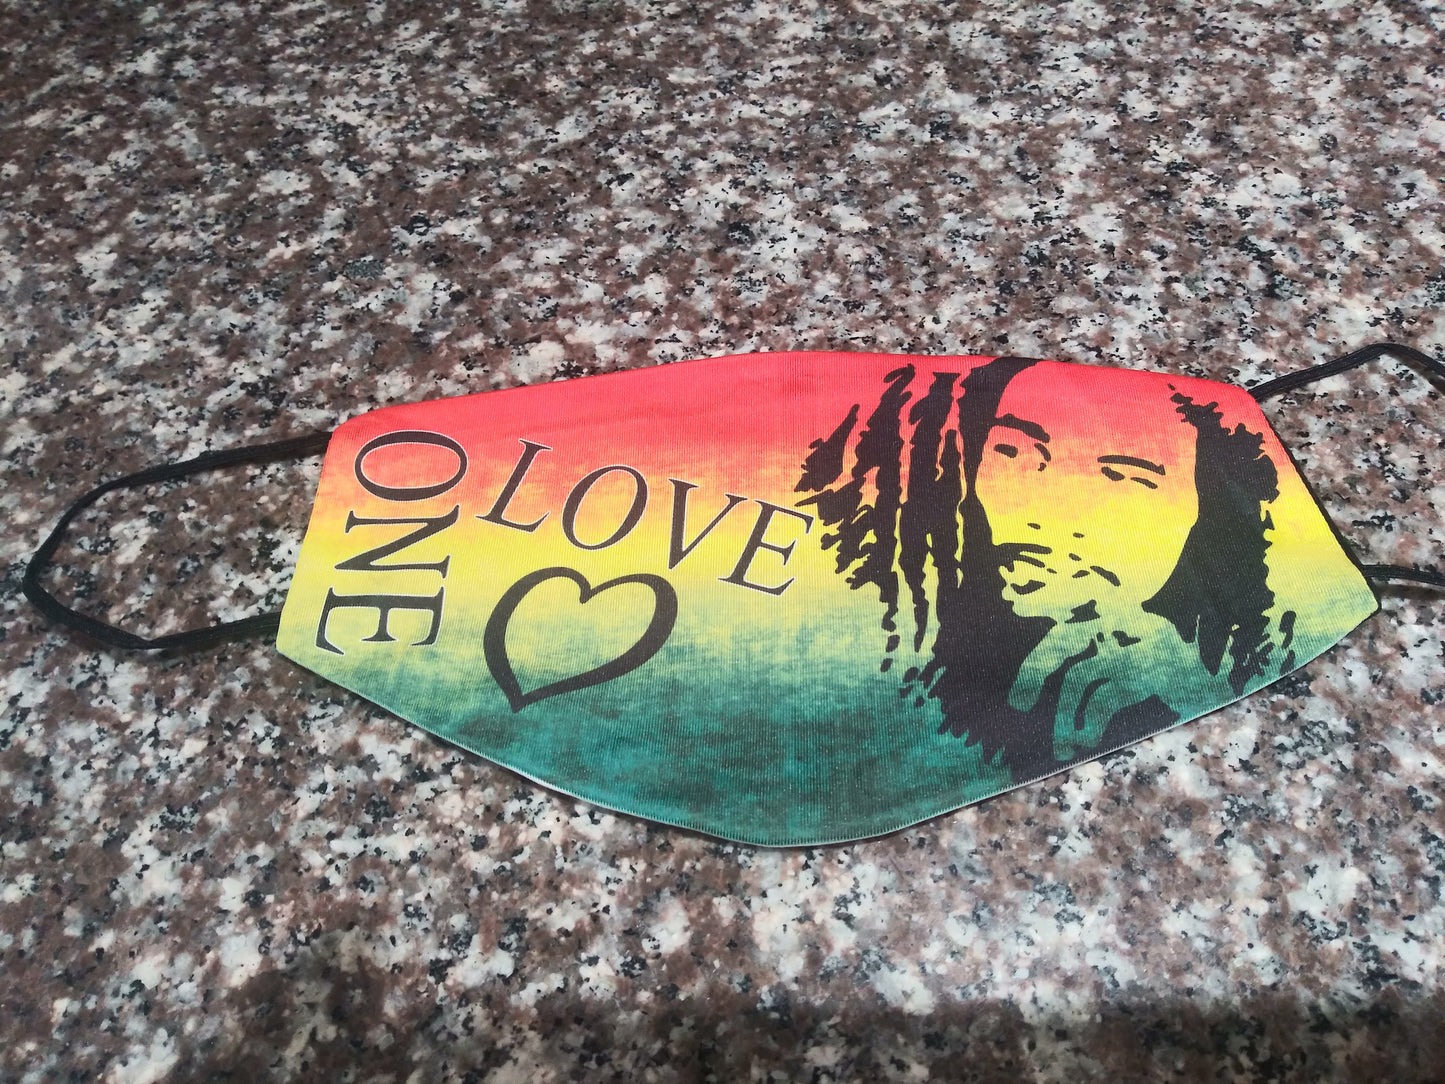 Bob Marley One Love Face Cover, washable pocket face mask with free carbon filter, adjustable ear clips, Face Mask Jamaican Style, Reusable